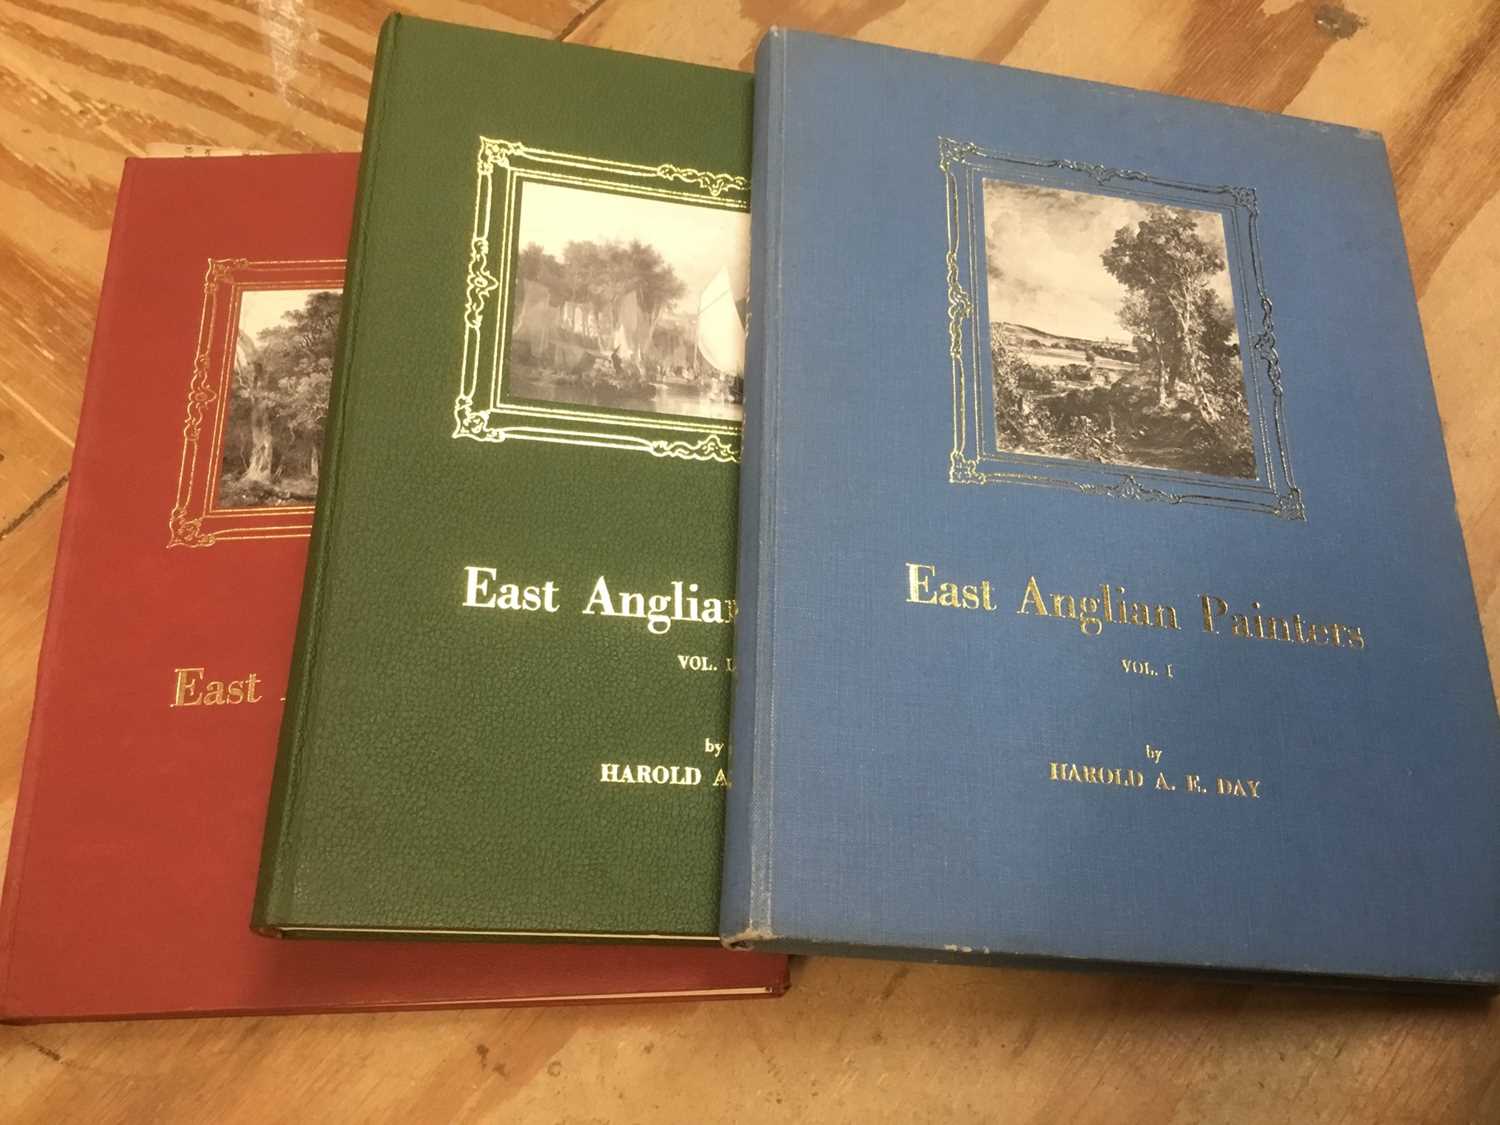 Harold A. E. Day - East Anglian Painters, 3 Volumes,